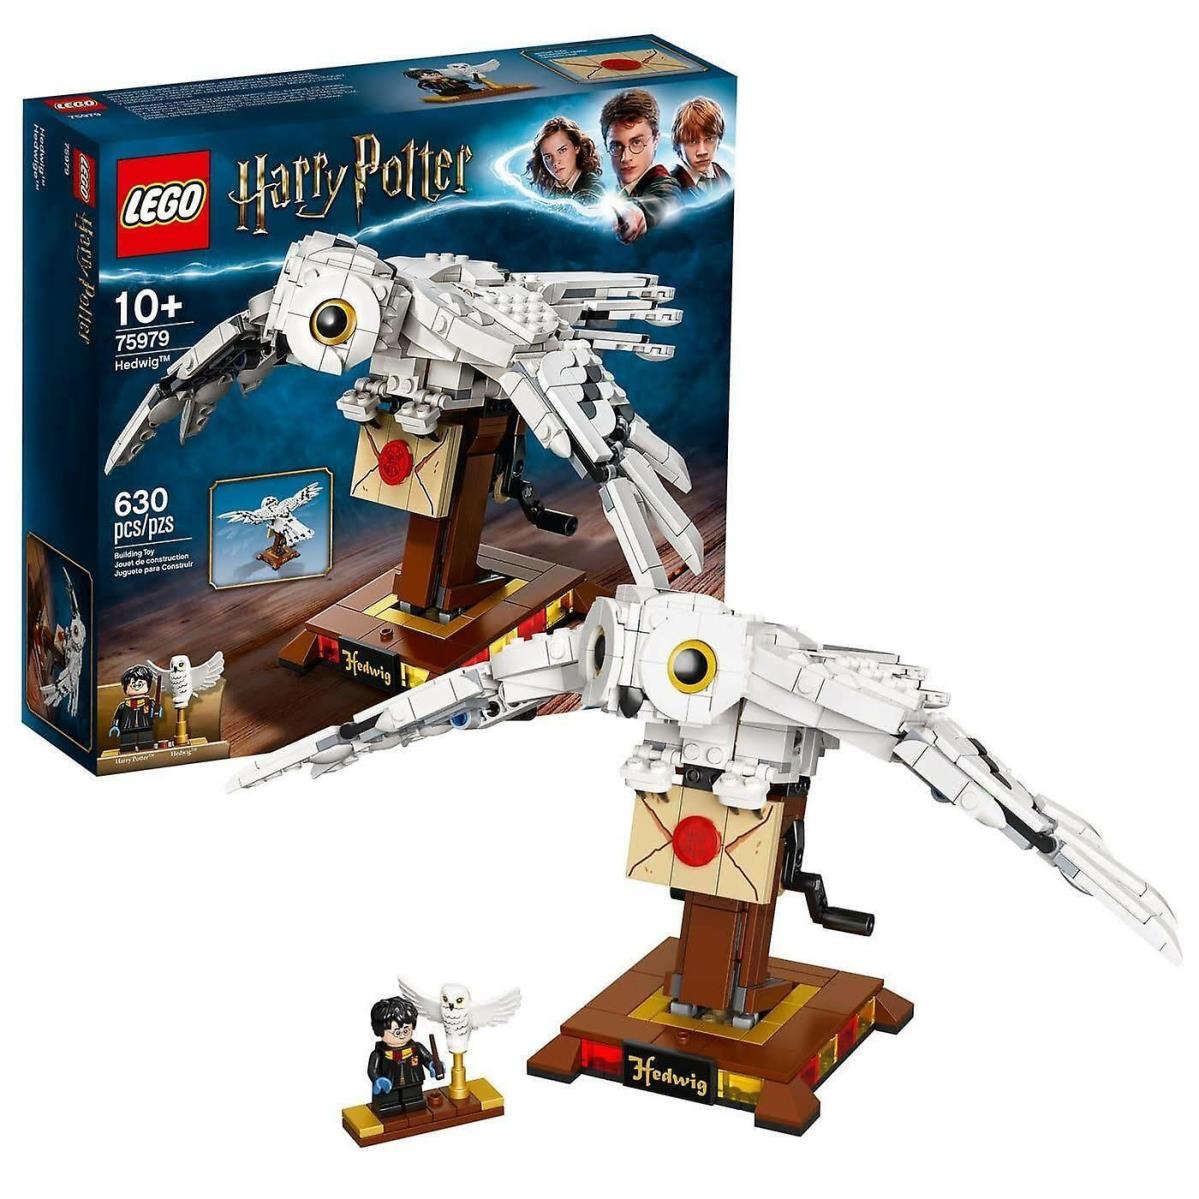 Lego Harry Potter 75979 Hedwig Building Toy 630 Pieces +